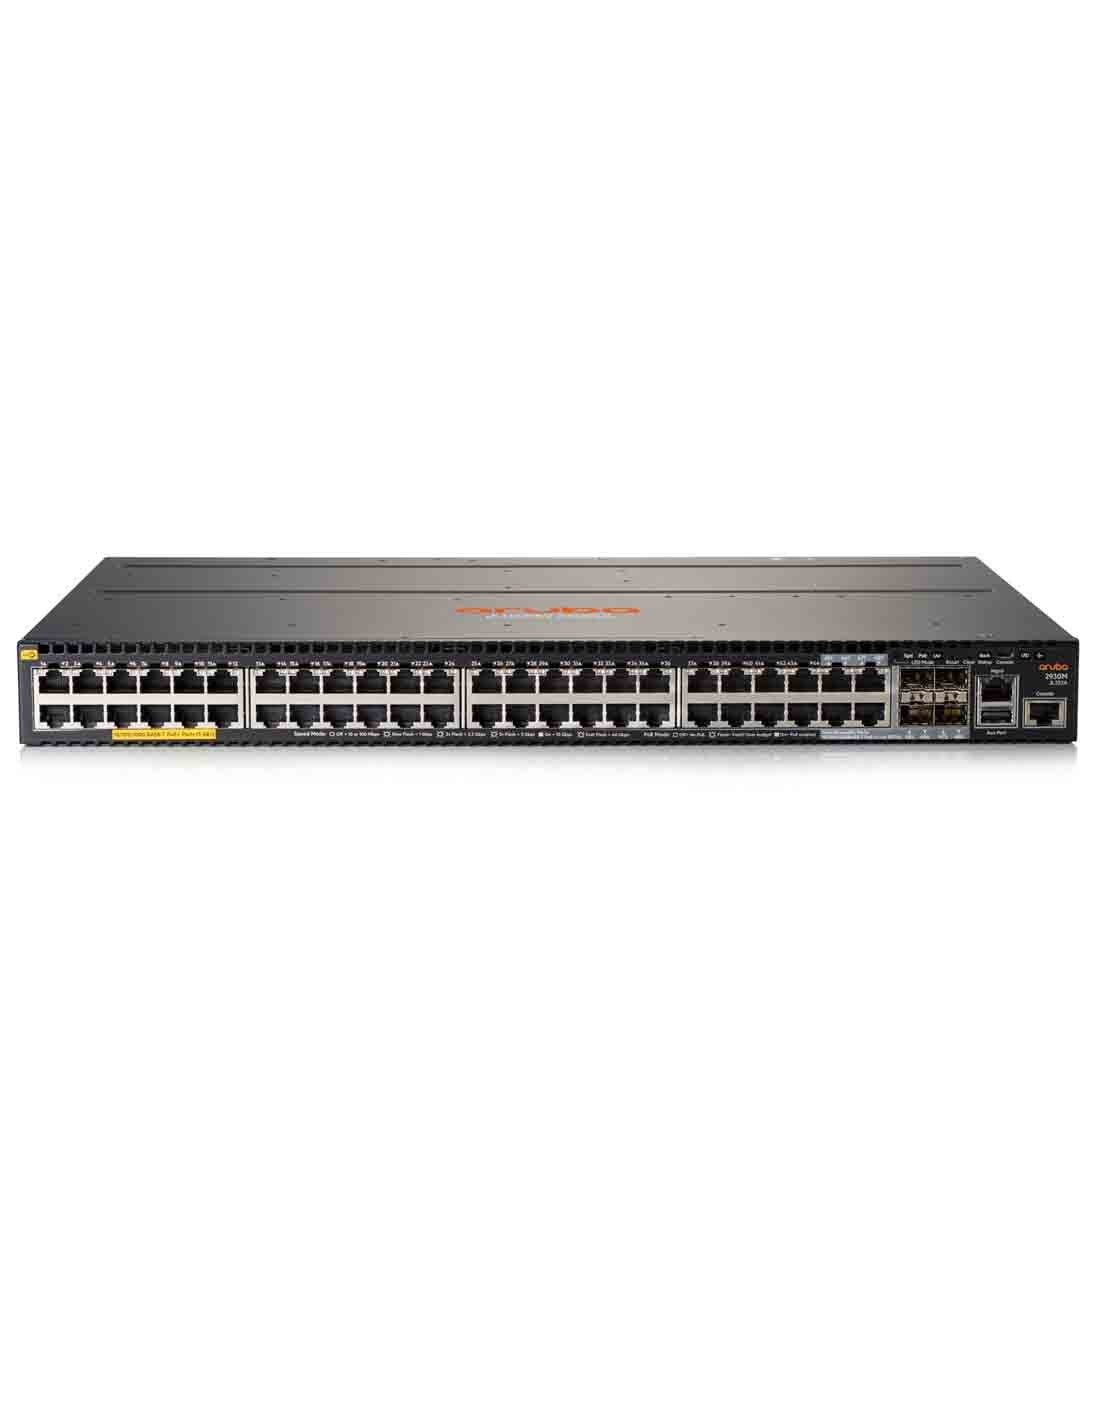 Aruba 2930M 48G PoE+ 1-slot Switch JL322A at a cheap price and free delivery in Dubai